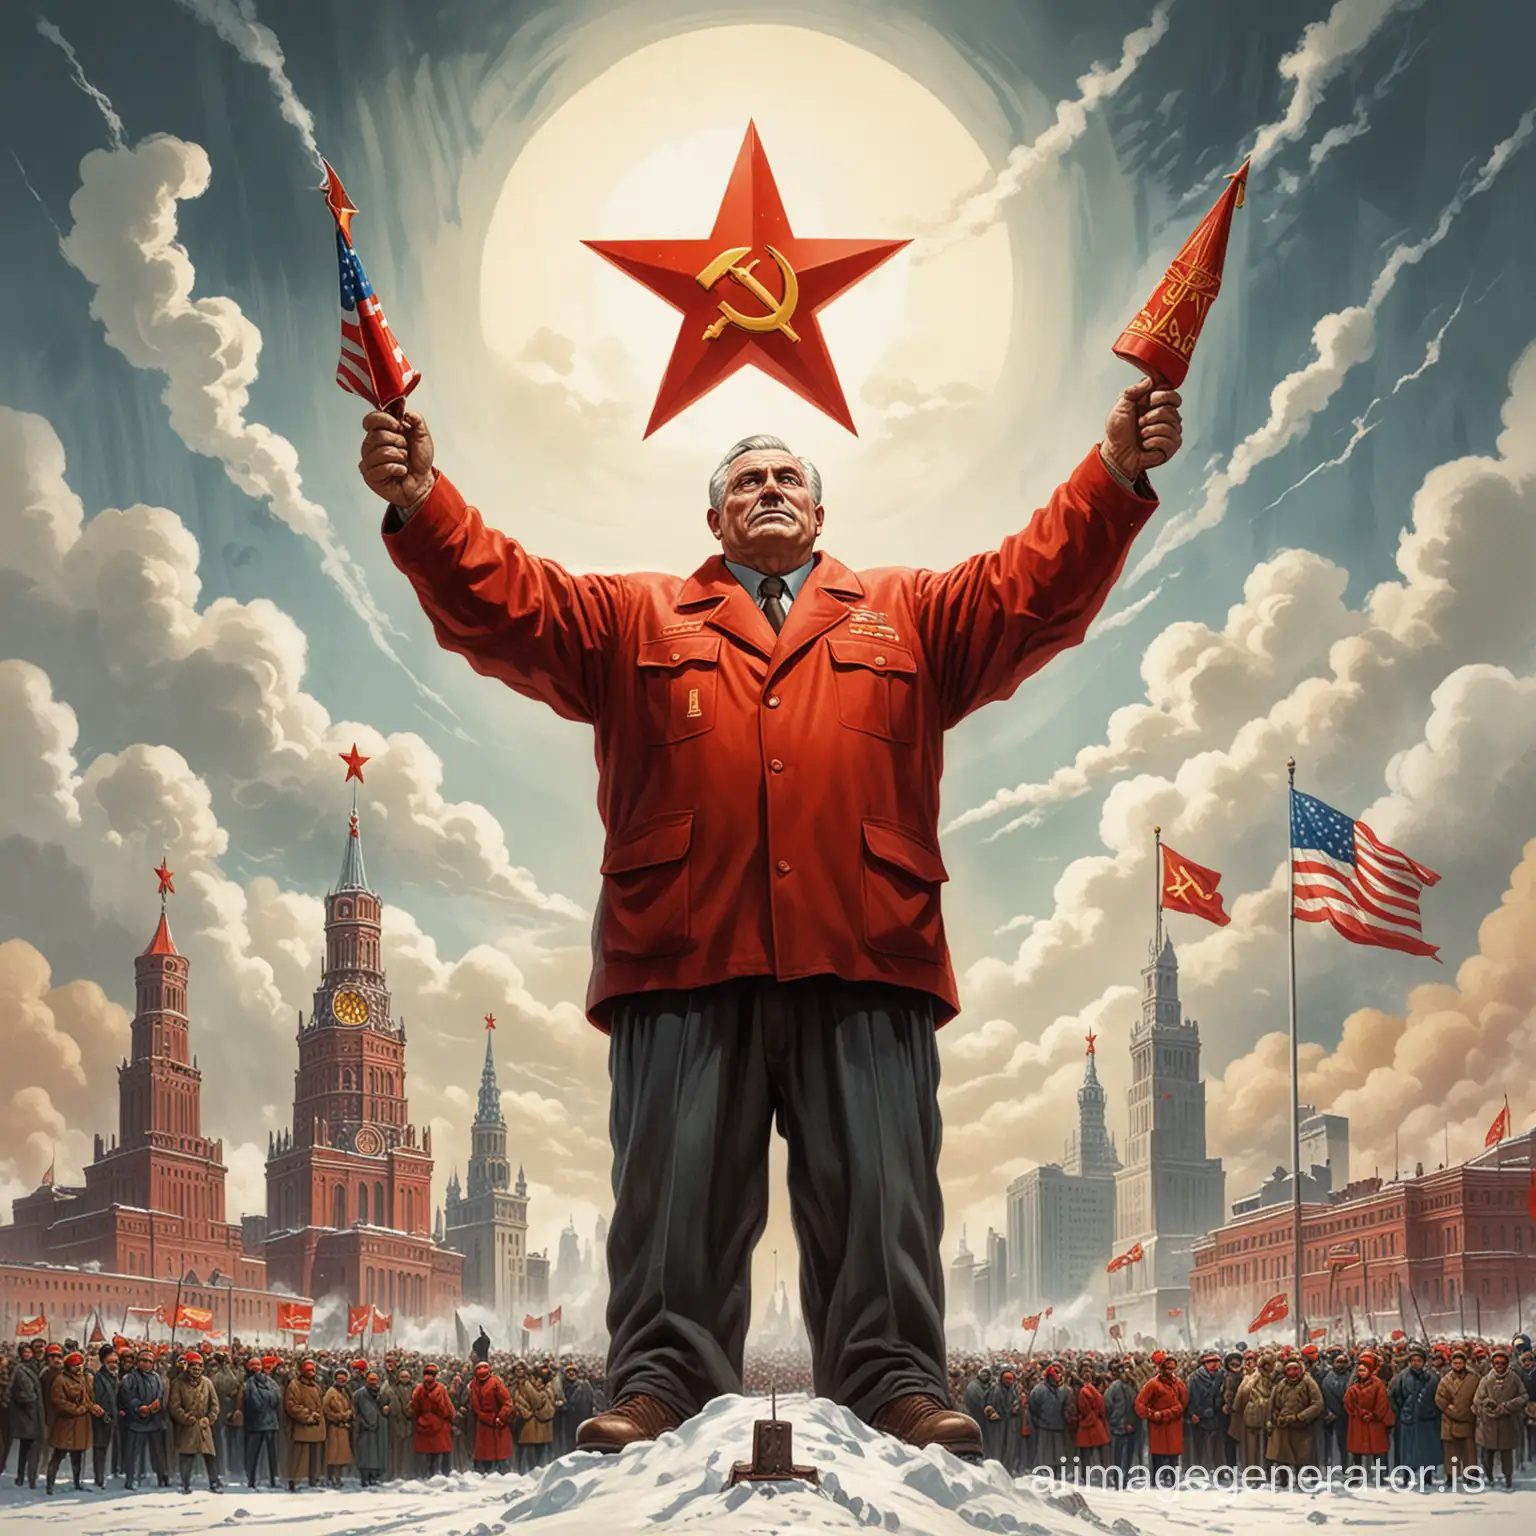 Create a caricature where the USSR is depicted as a giant symbol of Soviet power towering over the world during the Cold War, and the USA - as a small symbol of capitalism, looking in astonishment at the greatness of the Soviet Union.